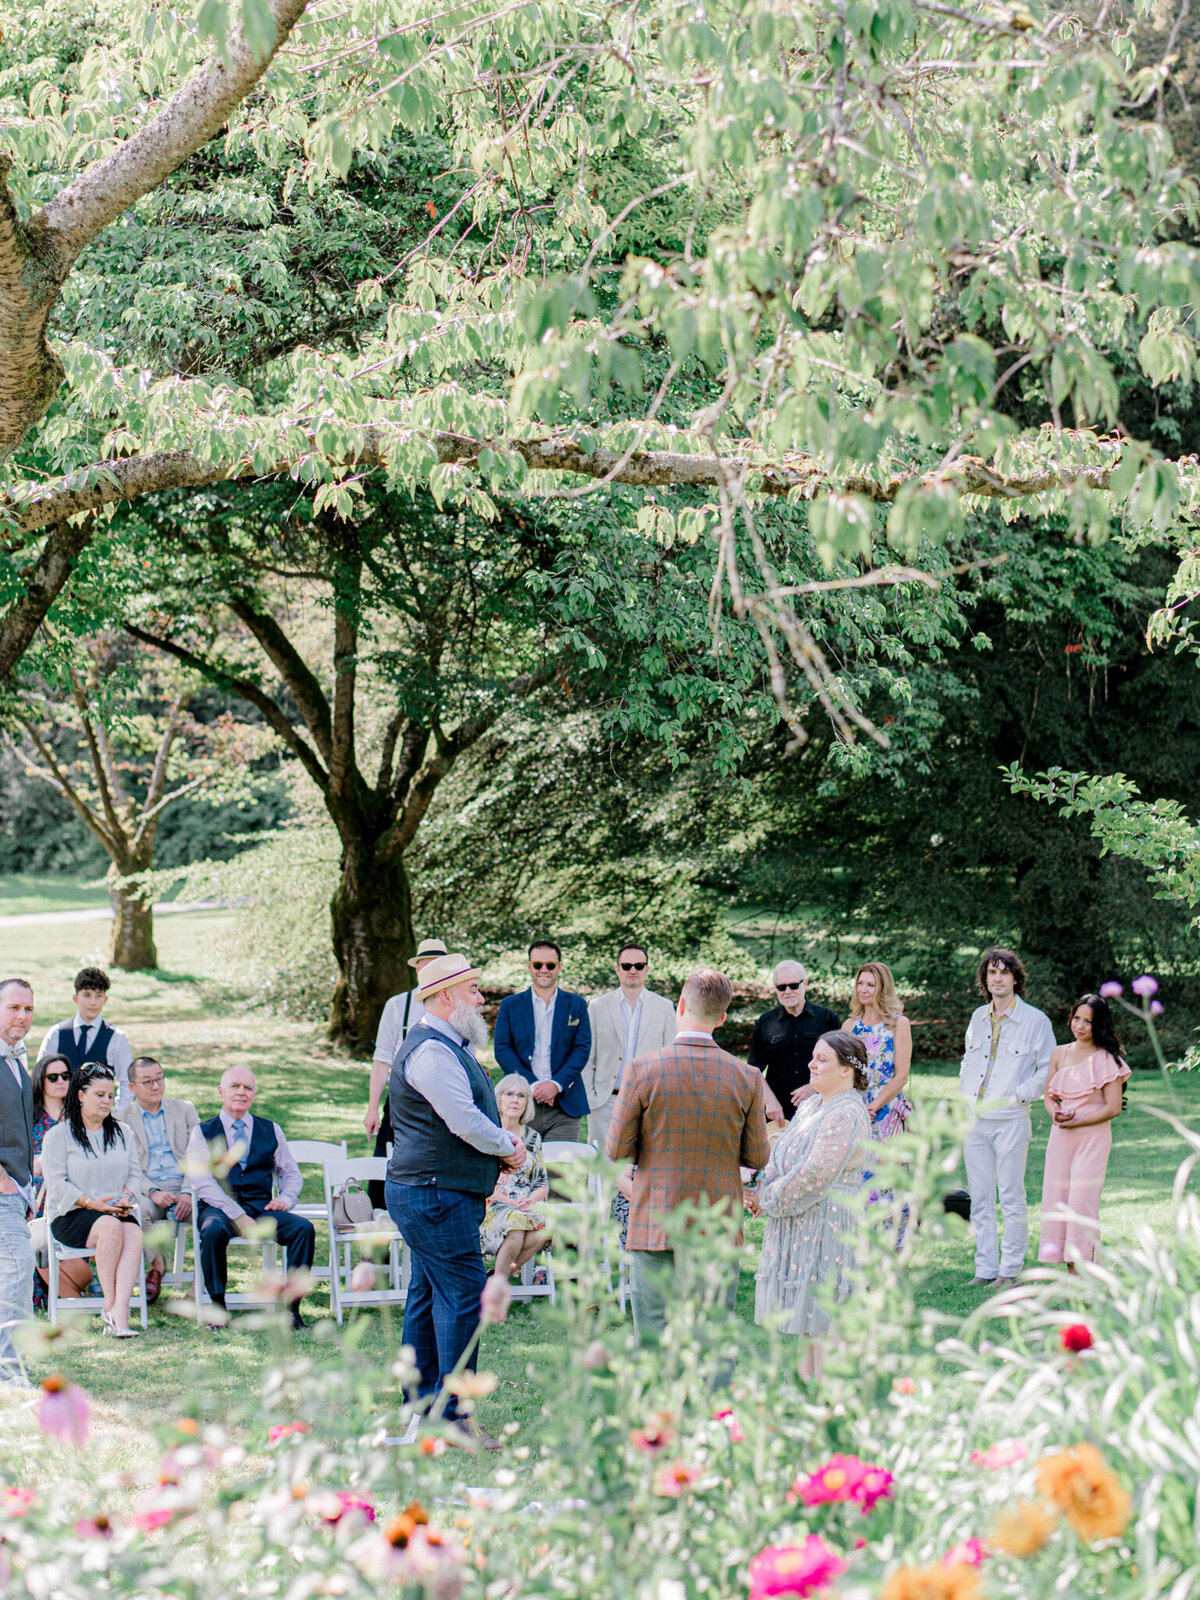 Classic and timeless outdoor garden wedding reception, captured by Julie Jagt Photography, fine art wedding photographer in Vancouver, BC. Featured on the Bronte Bride Vendor Guide.